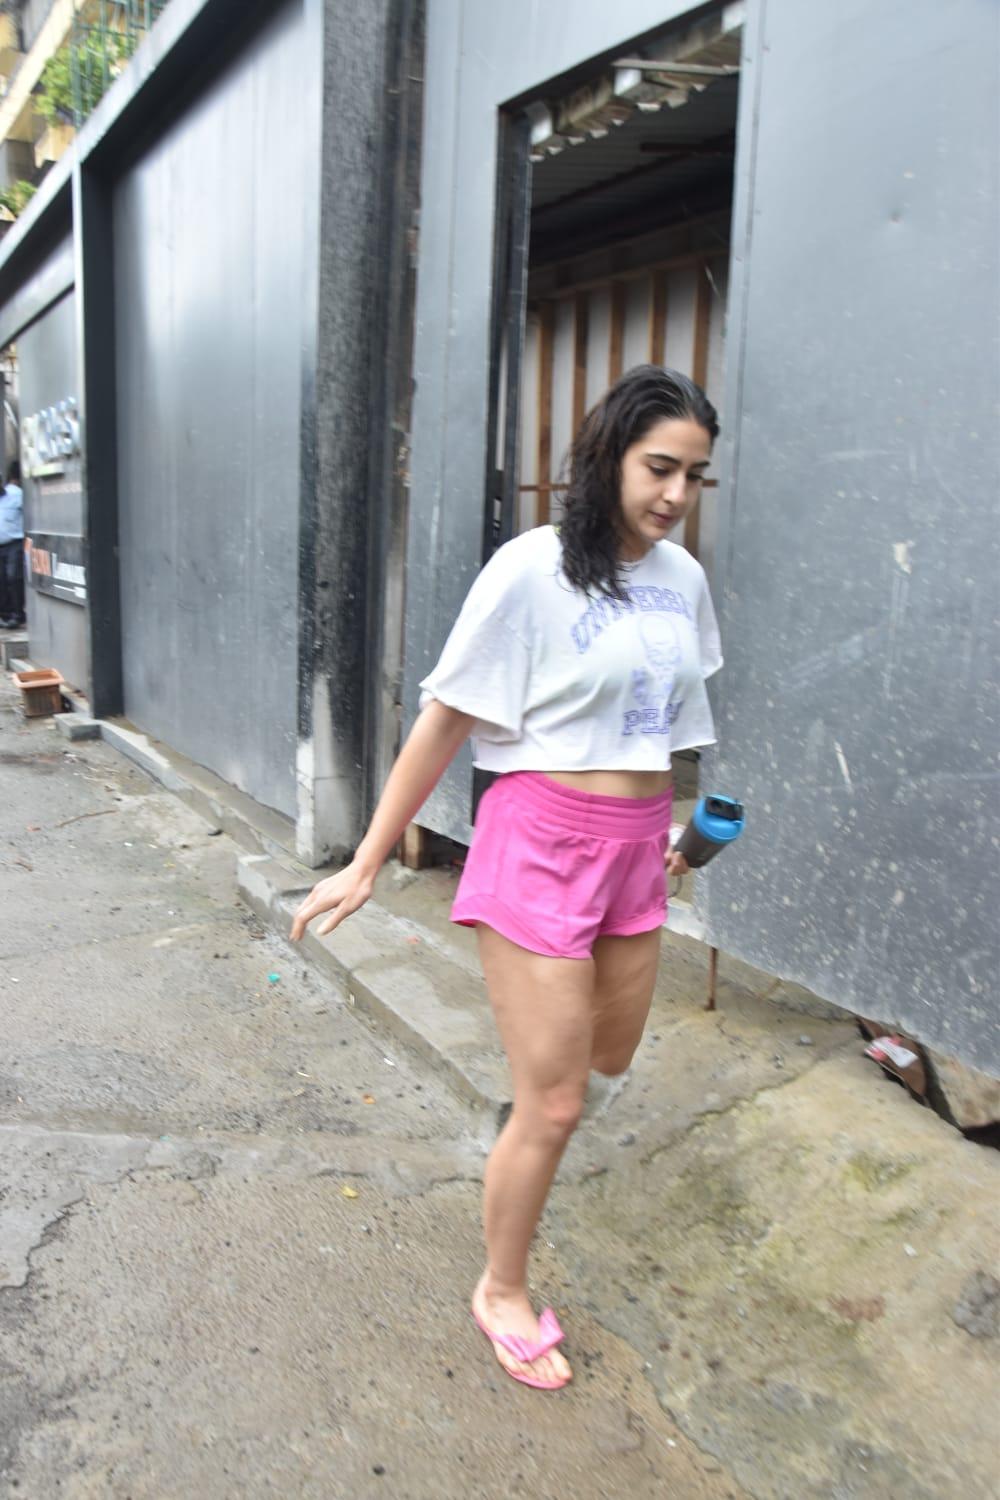 Sara looked as cute as can be in a white tee and cute pink shorts